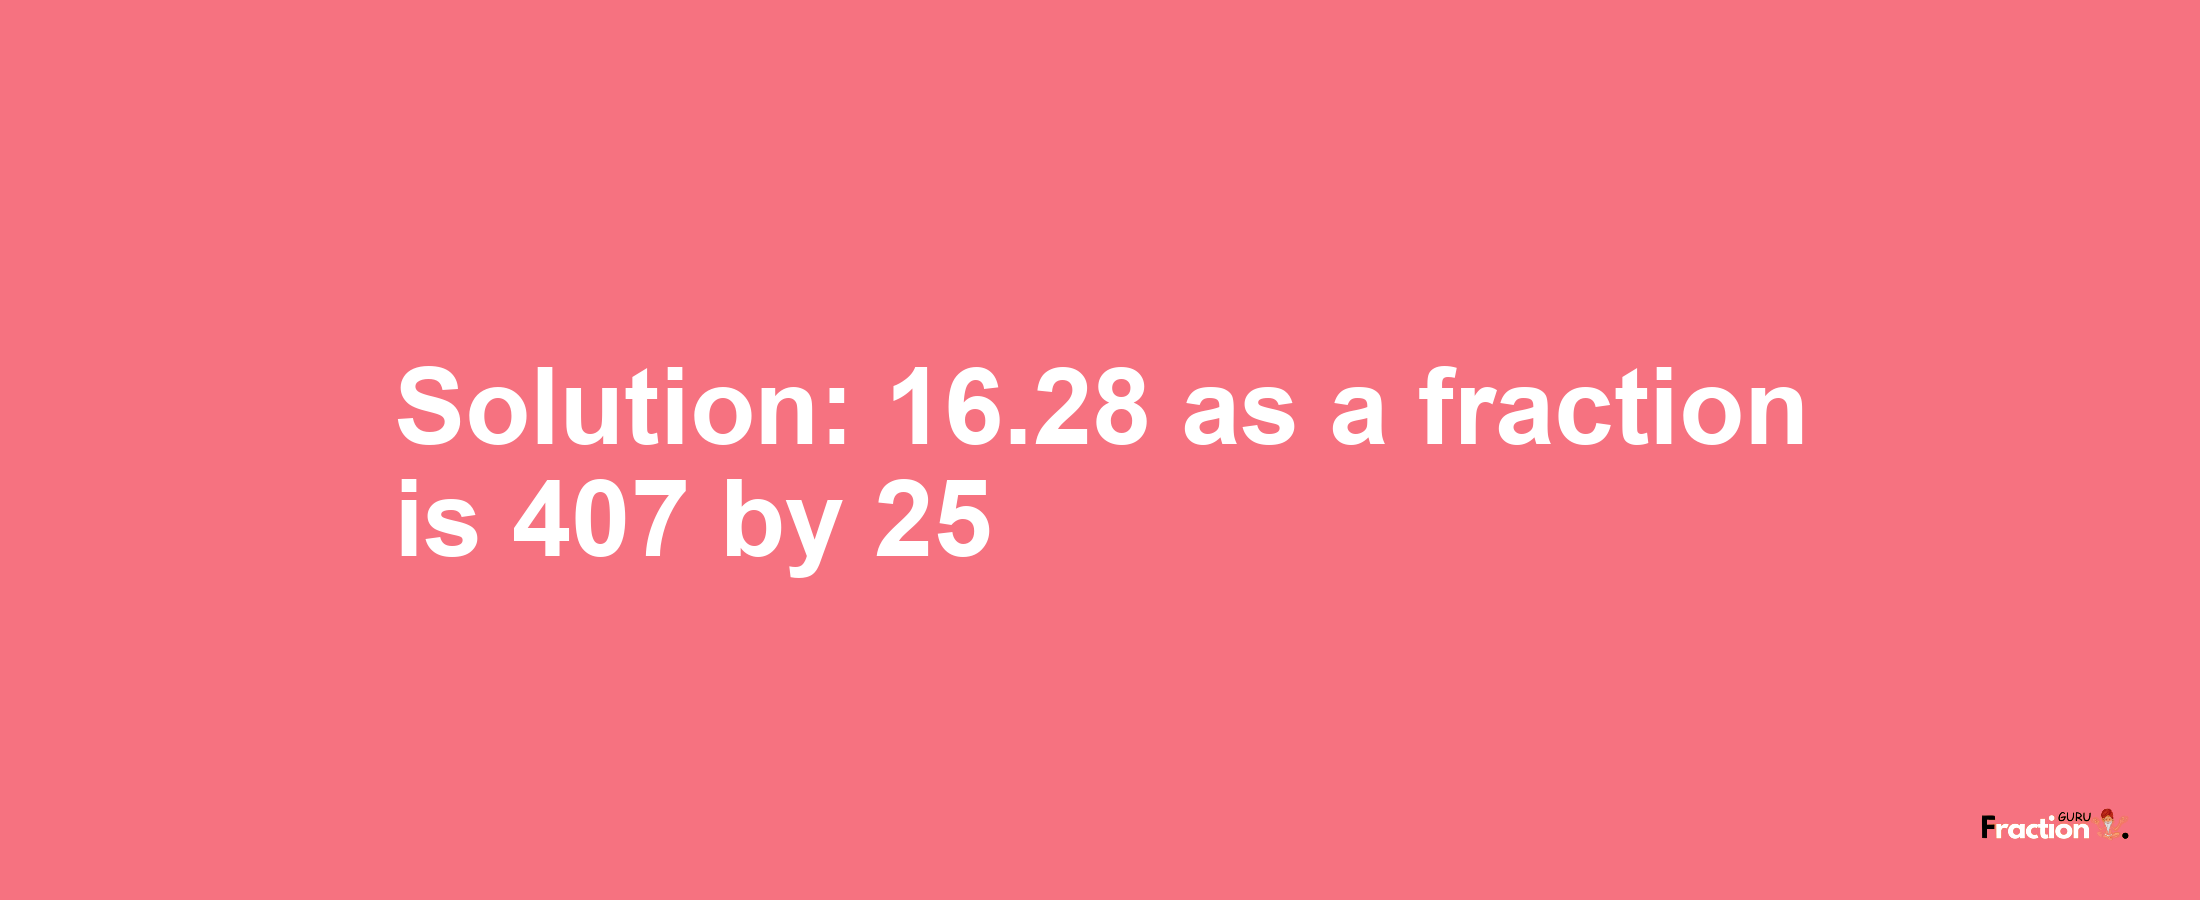 Solution:16.28 as a fraction is 407/25